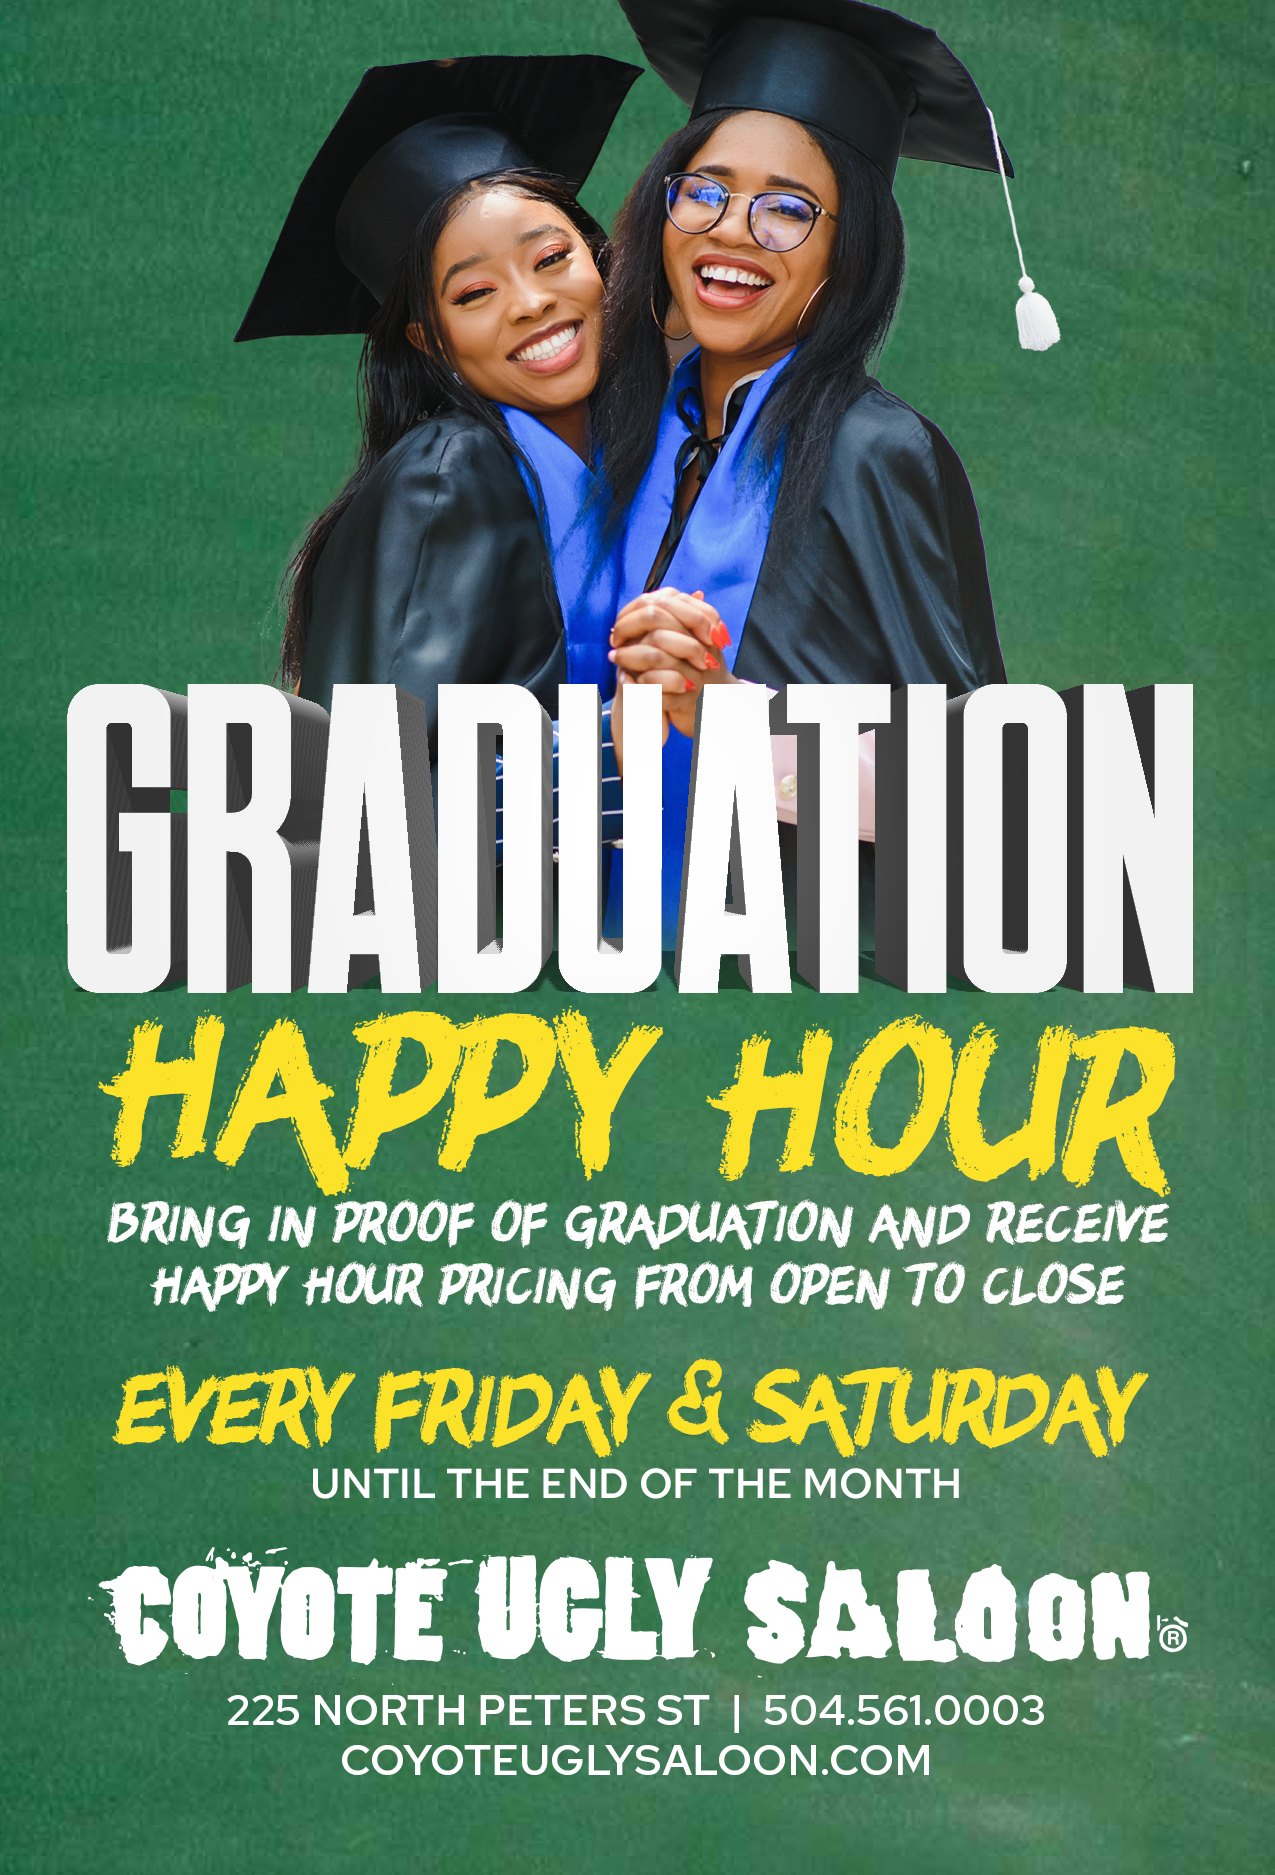 Graduation Happy Hour in New Orleans on May 20, 2022